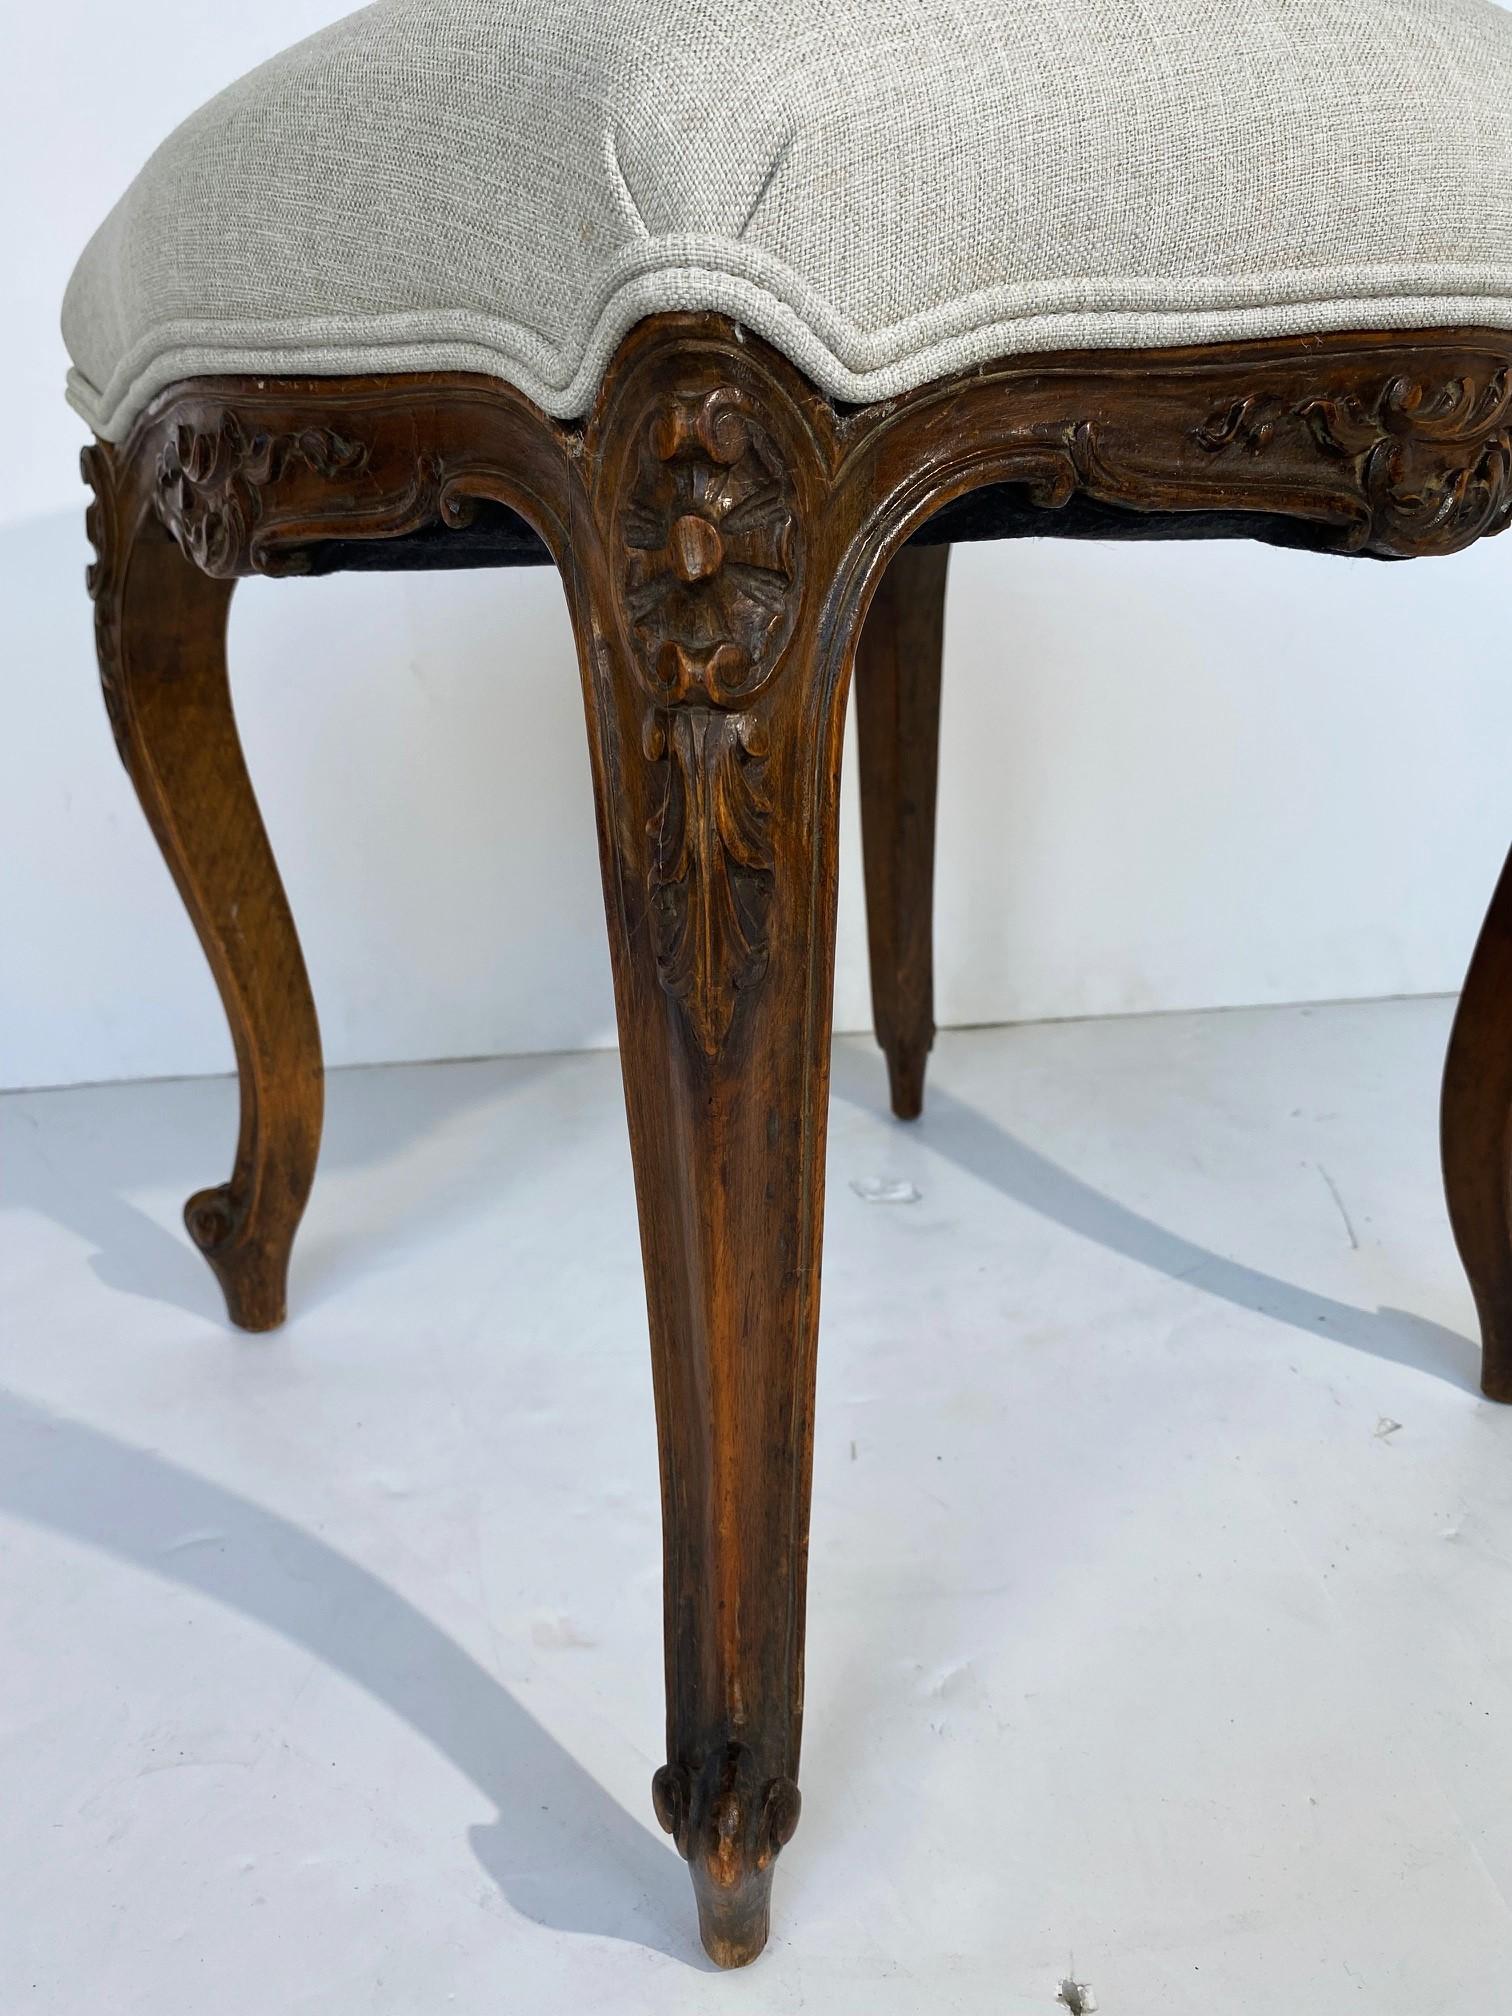 A Louis-style French finely carved bench. New upholstery.